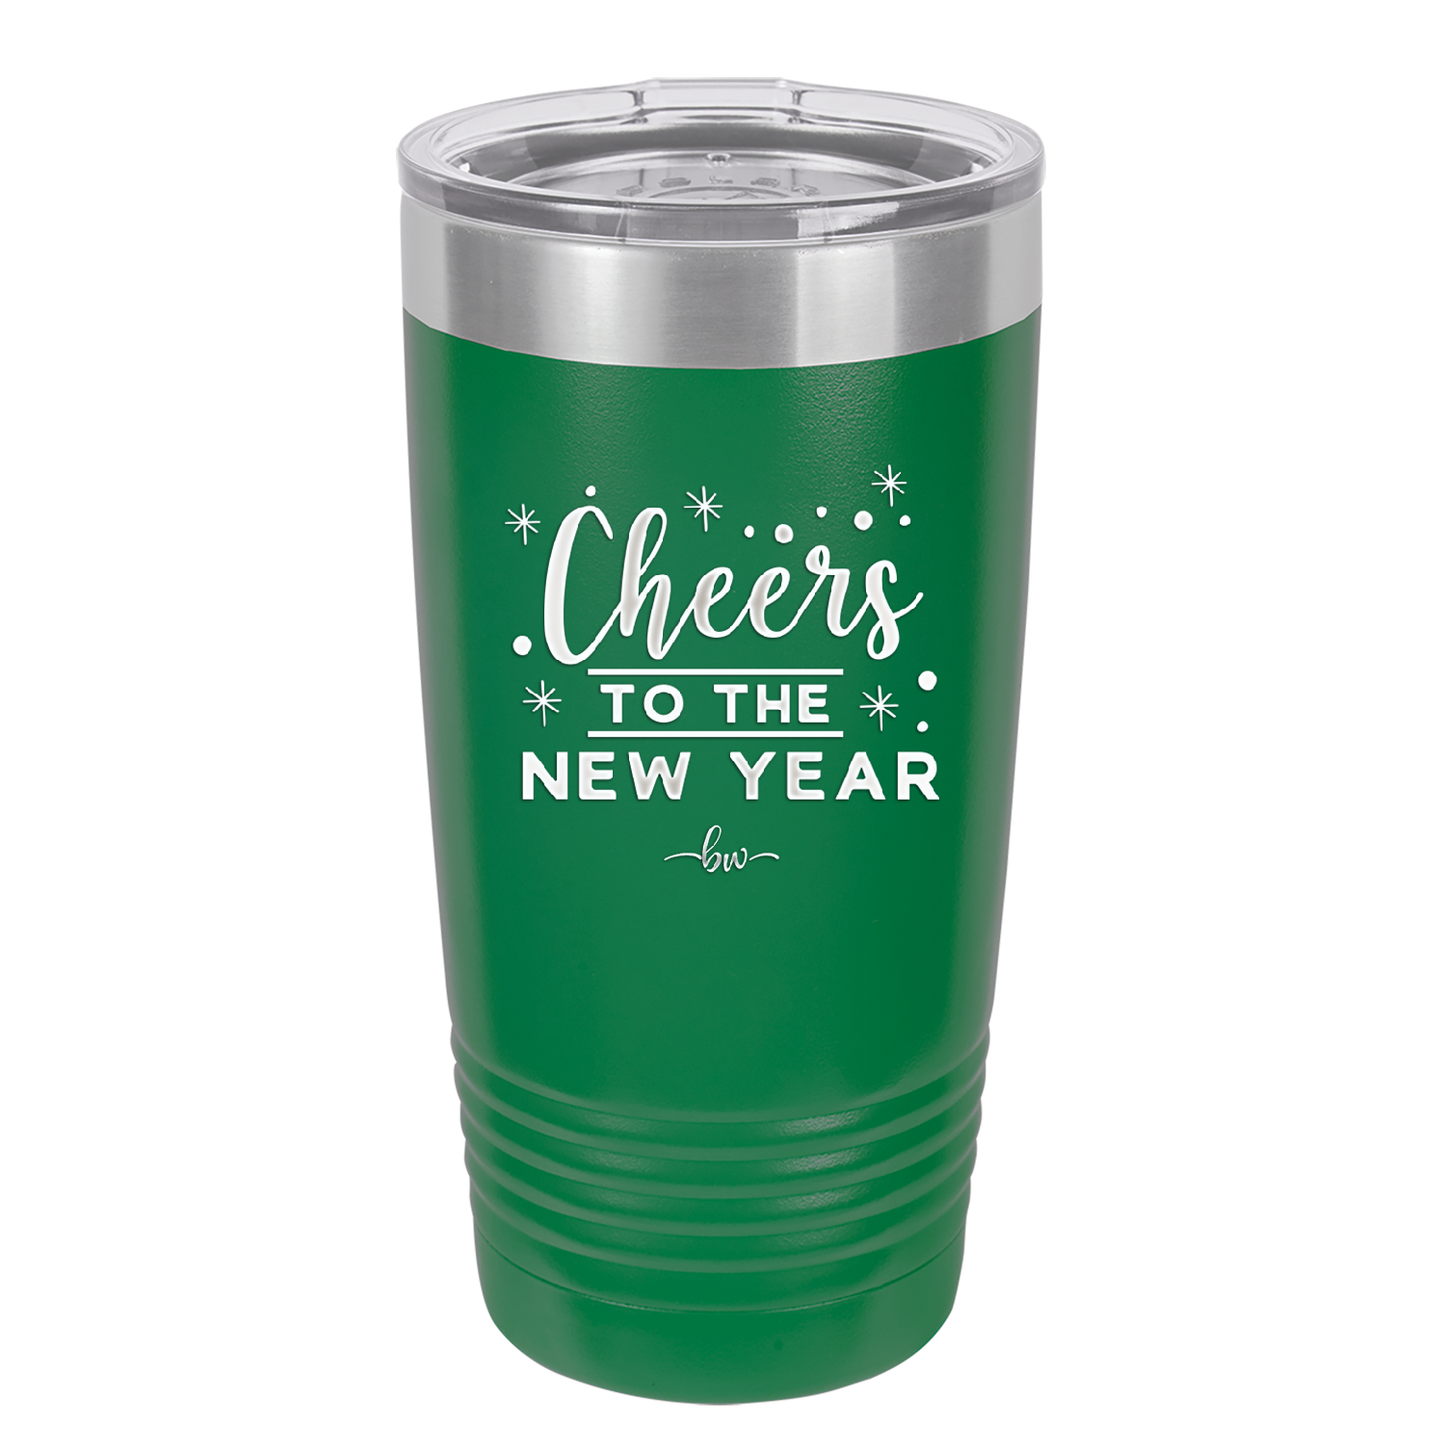 Cheers to the New Year - Laser Engraved Stainless Steel Drinkware - 1737 -